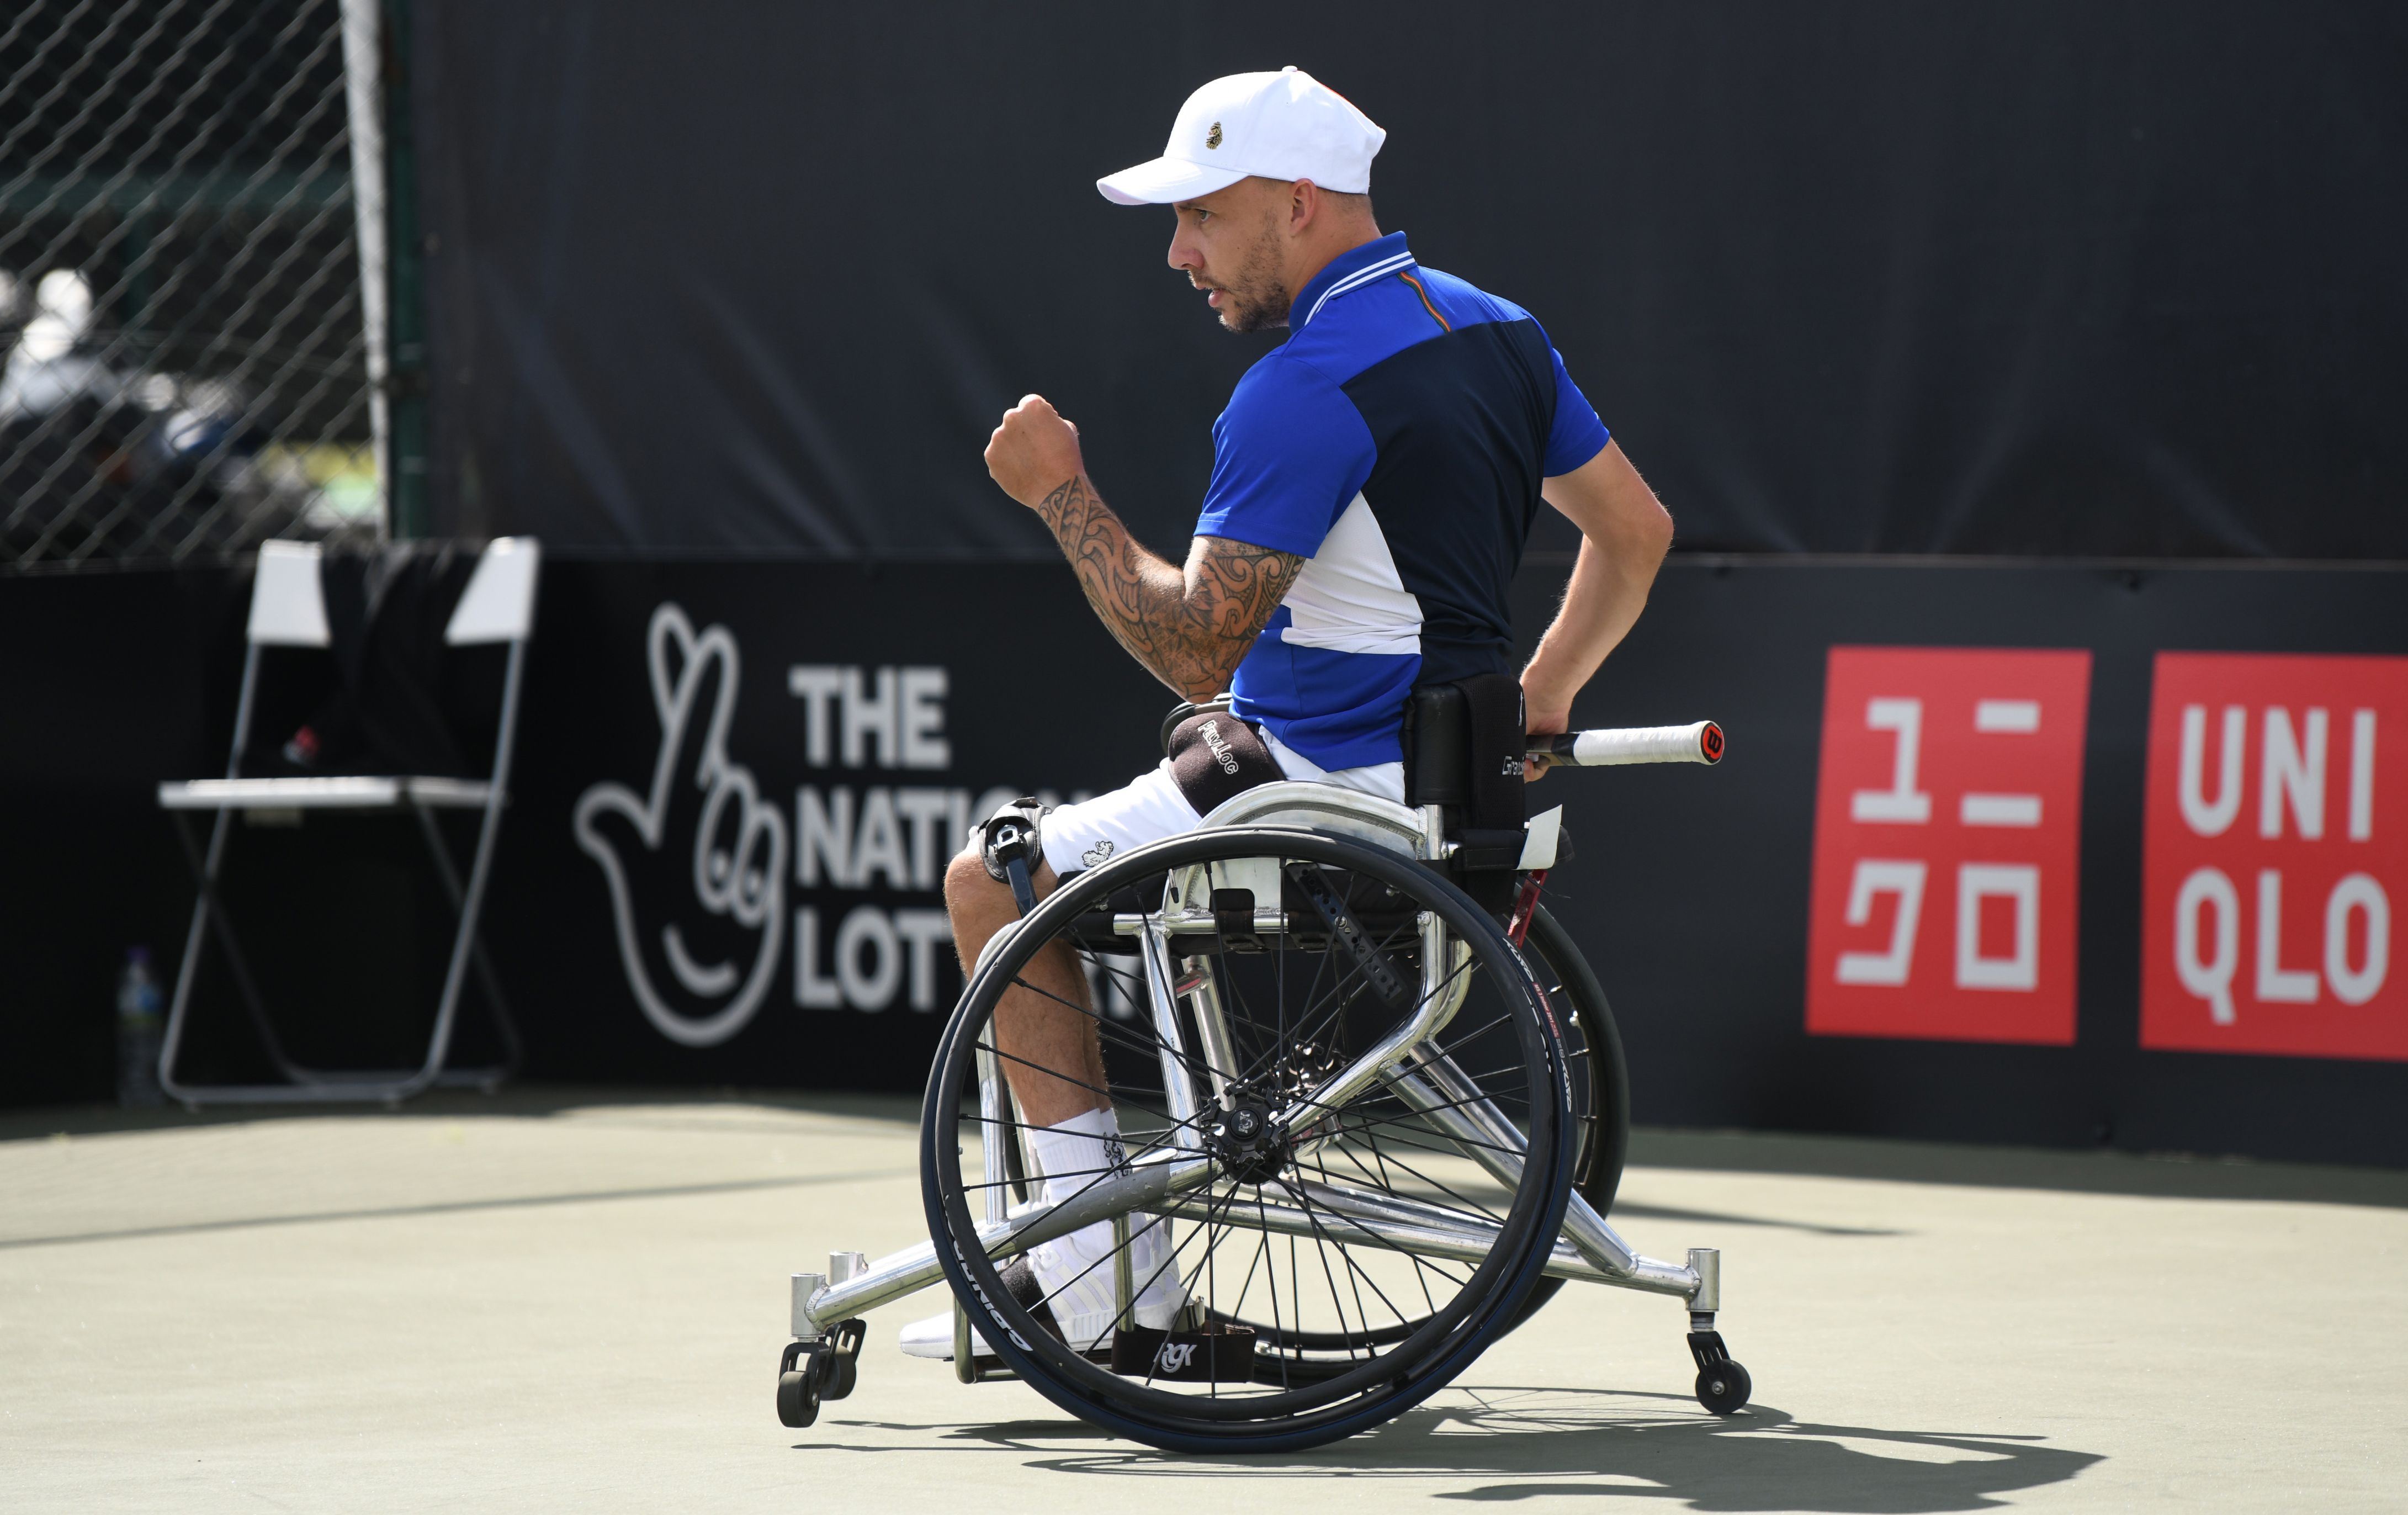 Wheelchair Masters 2022 Preview, draw and live stream